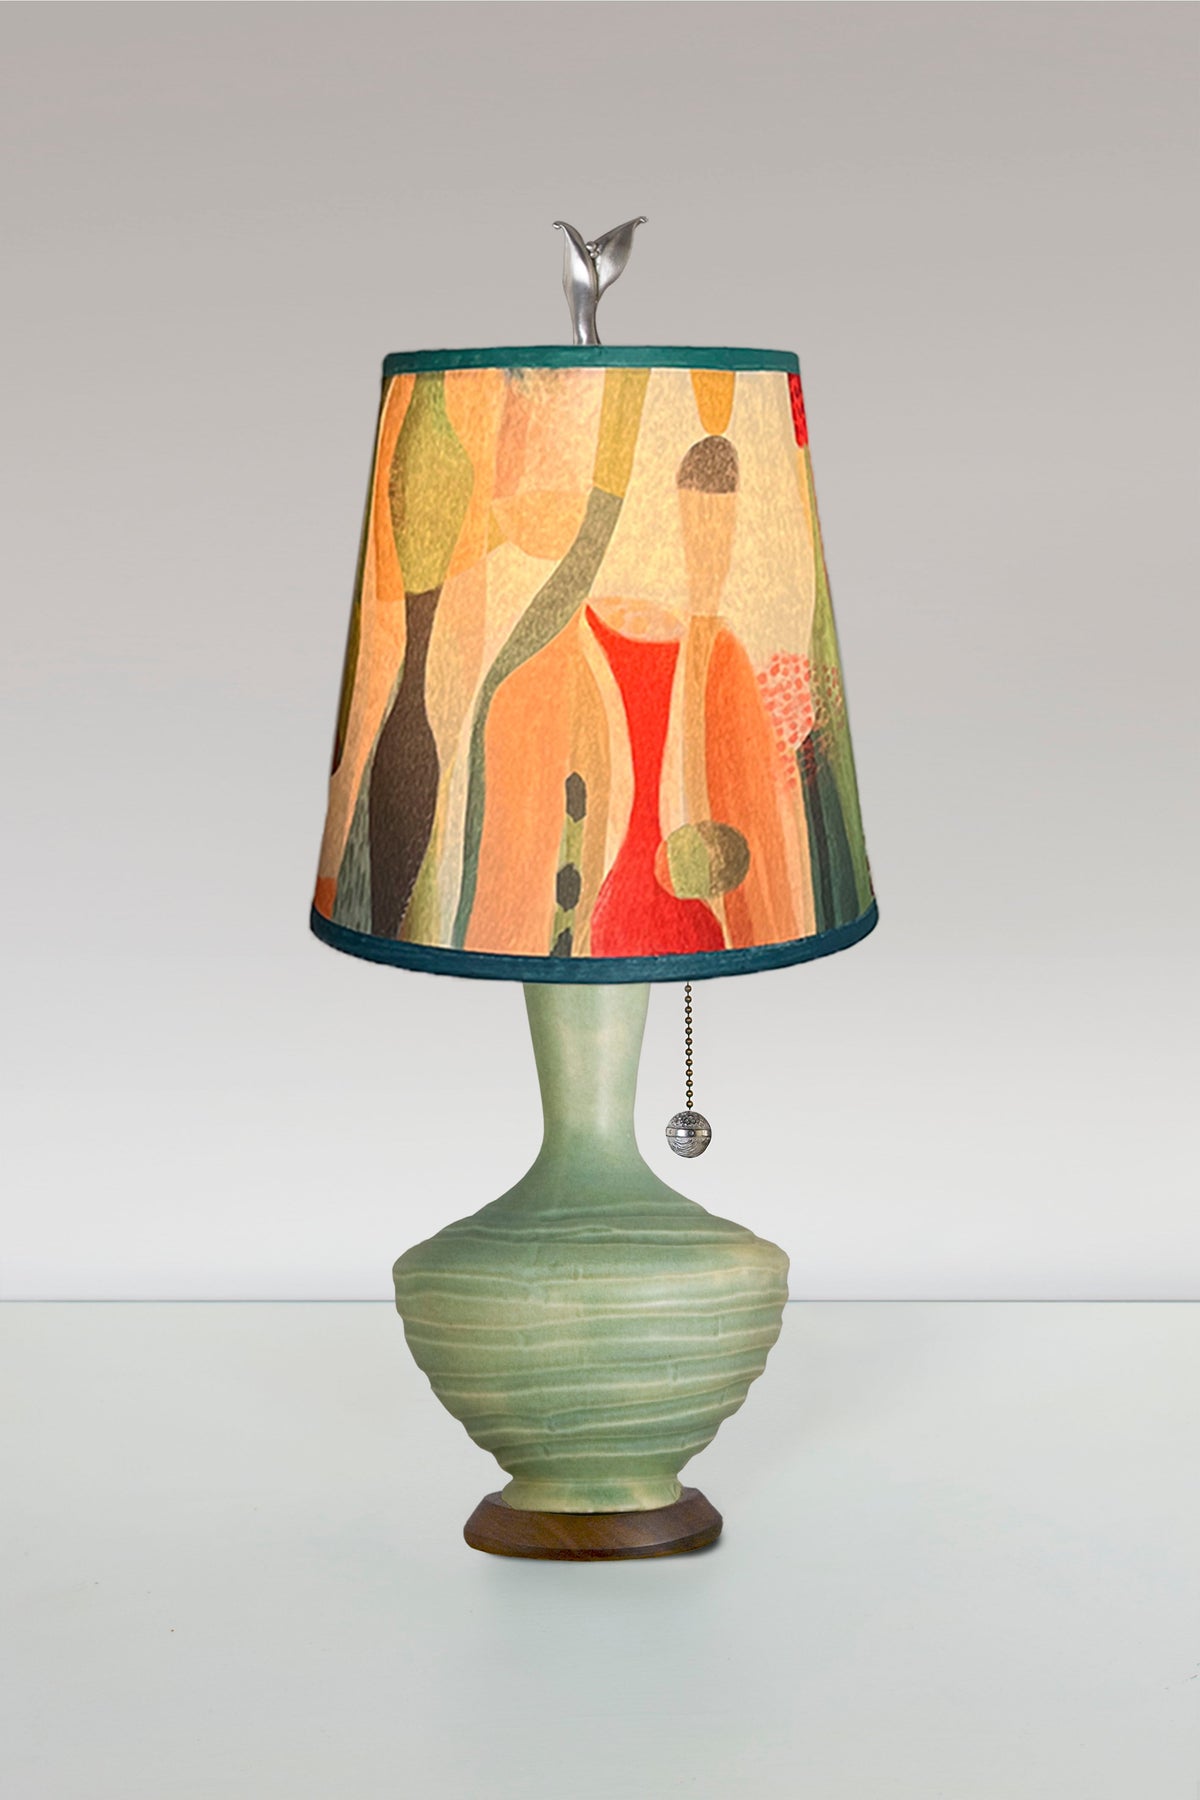 Ceramic Table Lamp in Old Copper with Small Drum Shade in Riviera in Poppy